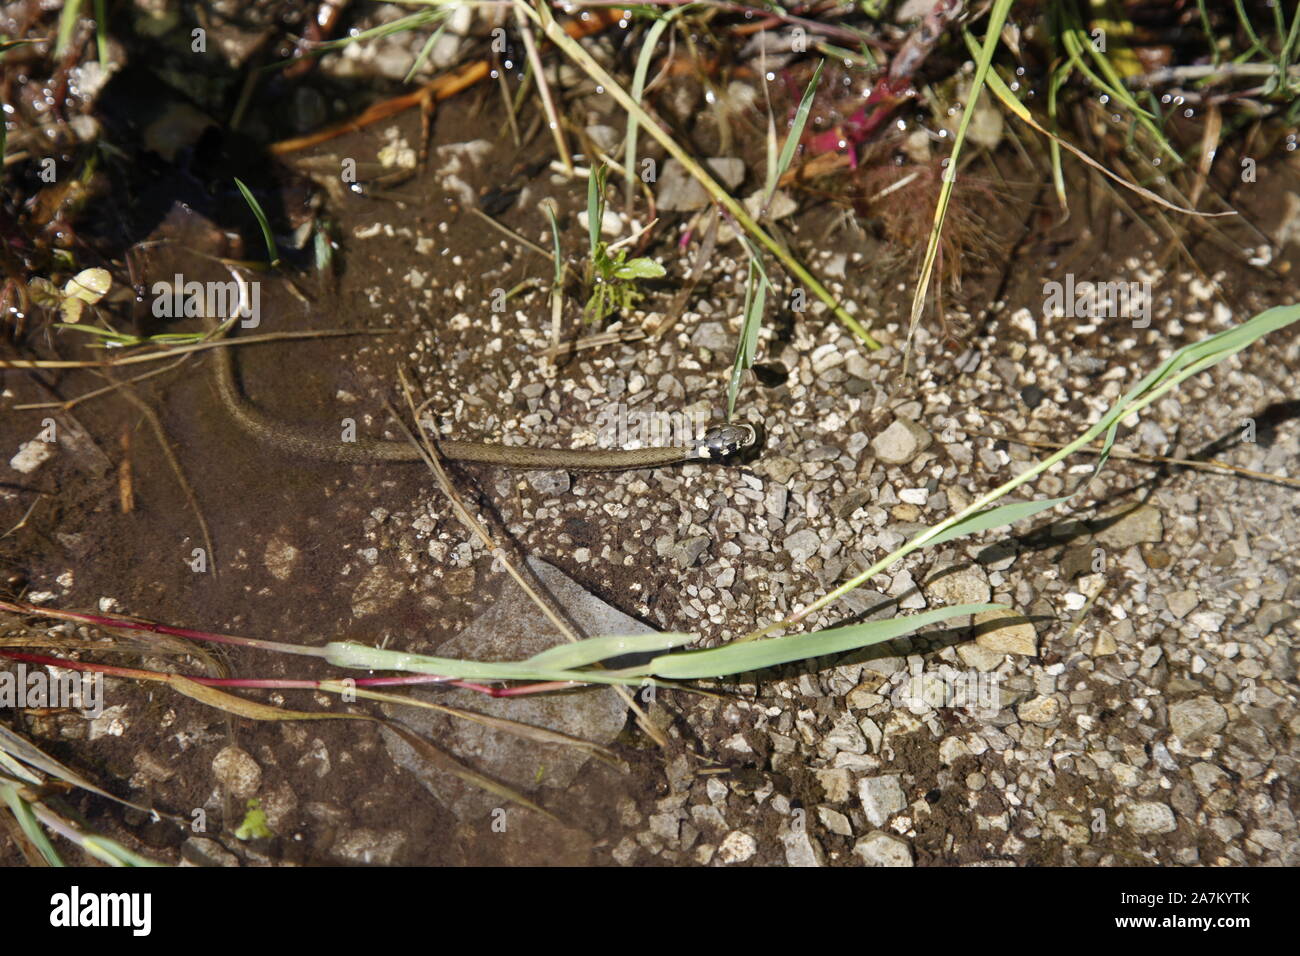 Adder snake swimming in a stream Stock Photo